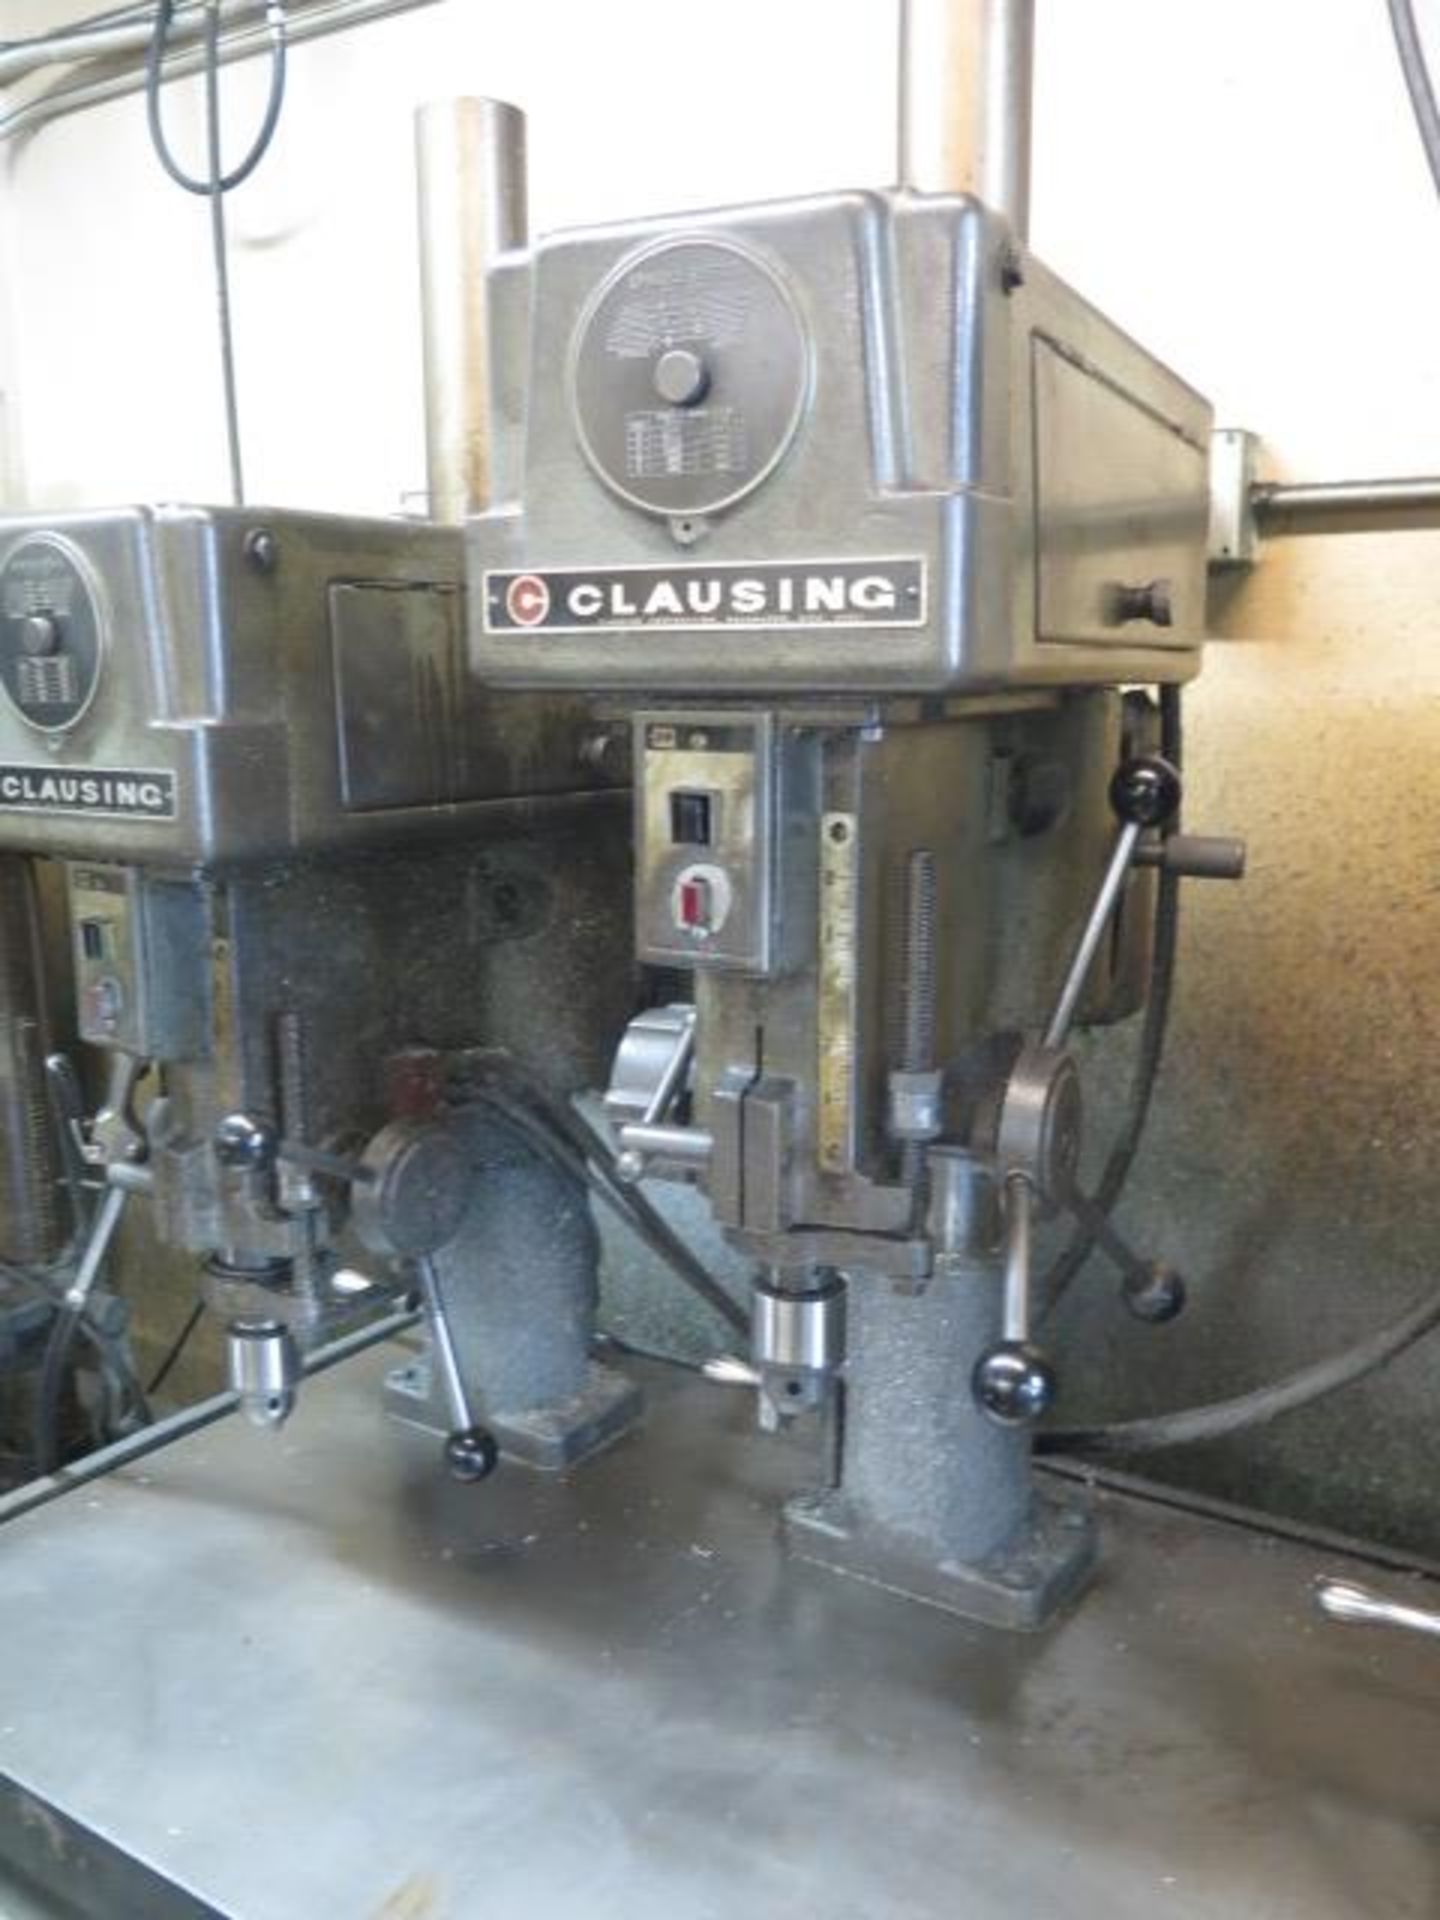 Clausing 4-Head Gang Drill Press w/ 5-Speed Heads, 24” x 80” Table (SOLD AS-IS - NO WARRANTY) - Image 5 of 7